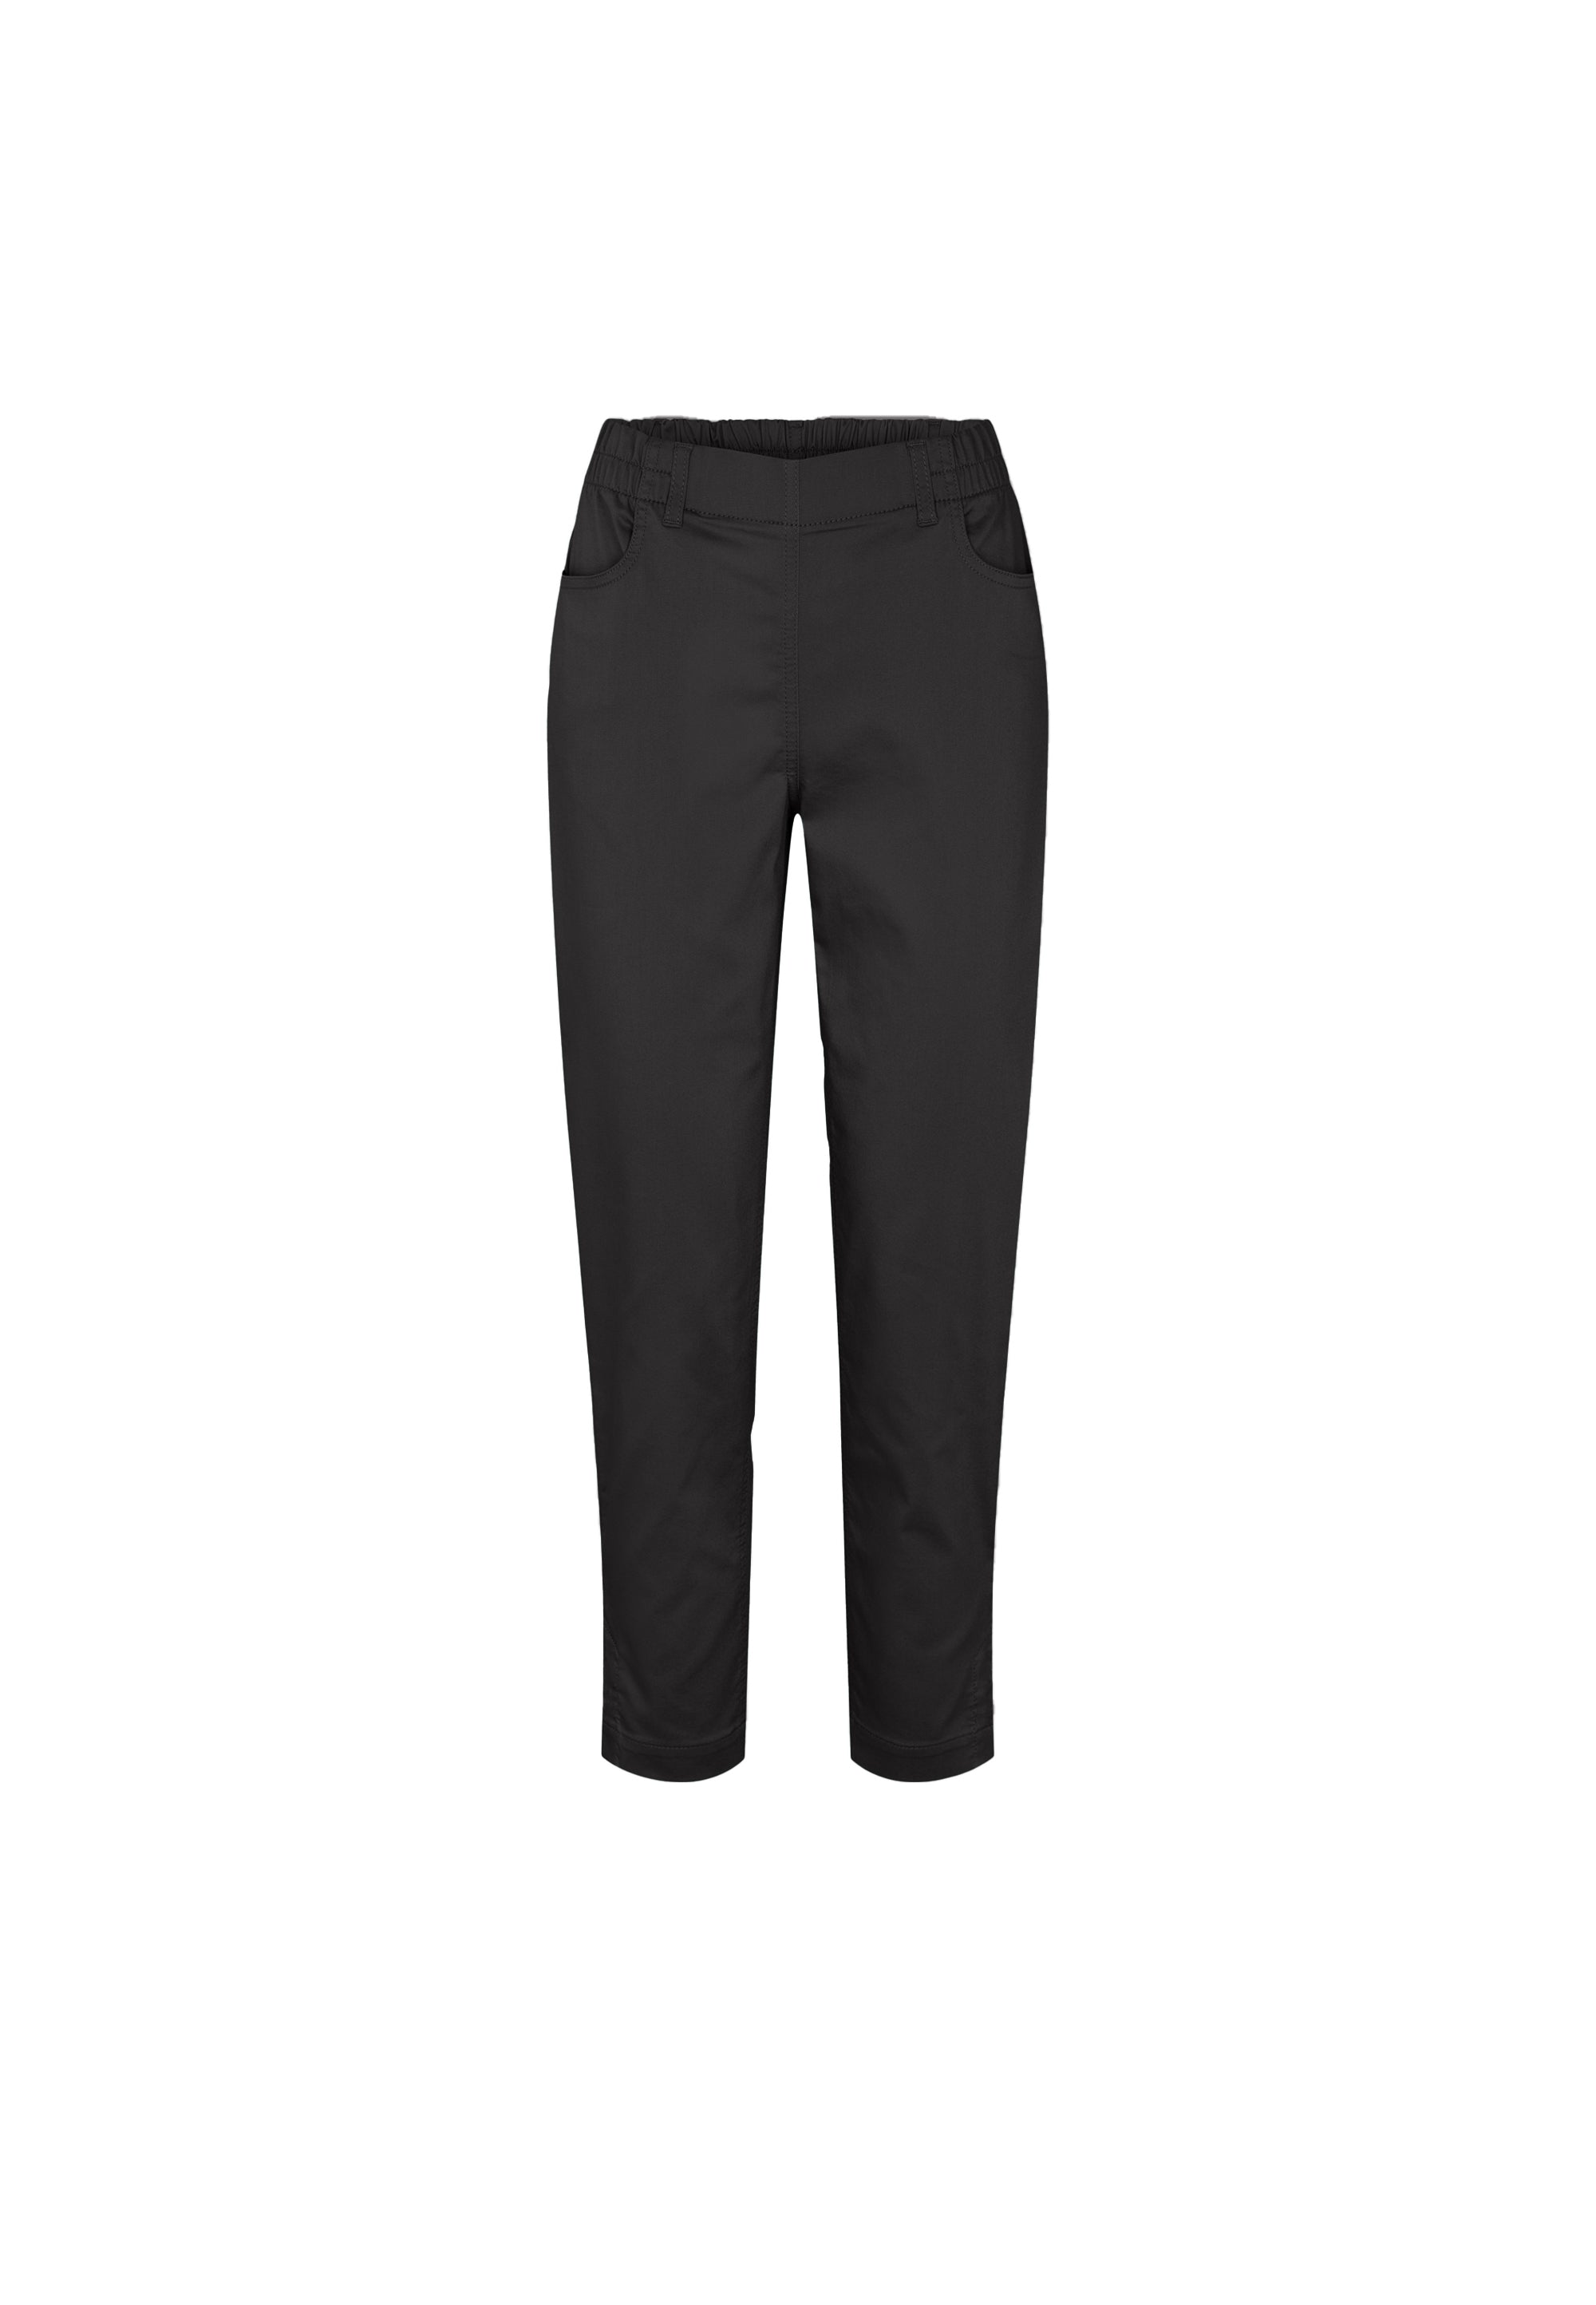 LAURIE Ellie Relaxed - Short Length Trousers RELAXED 99000 Black